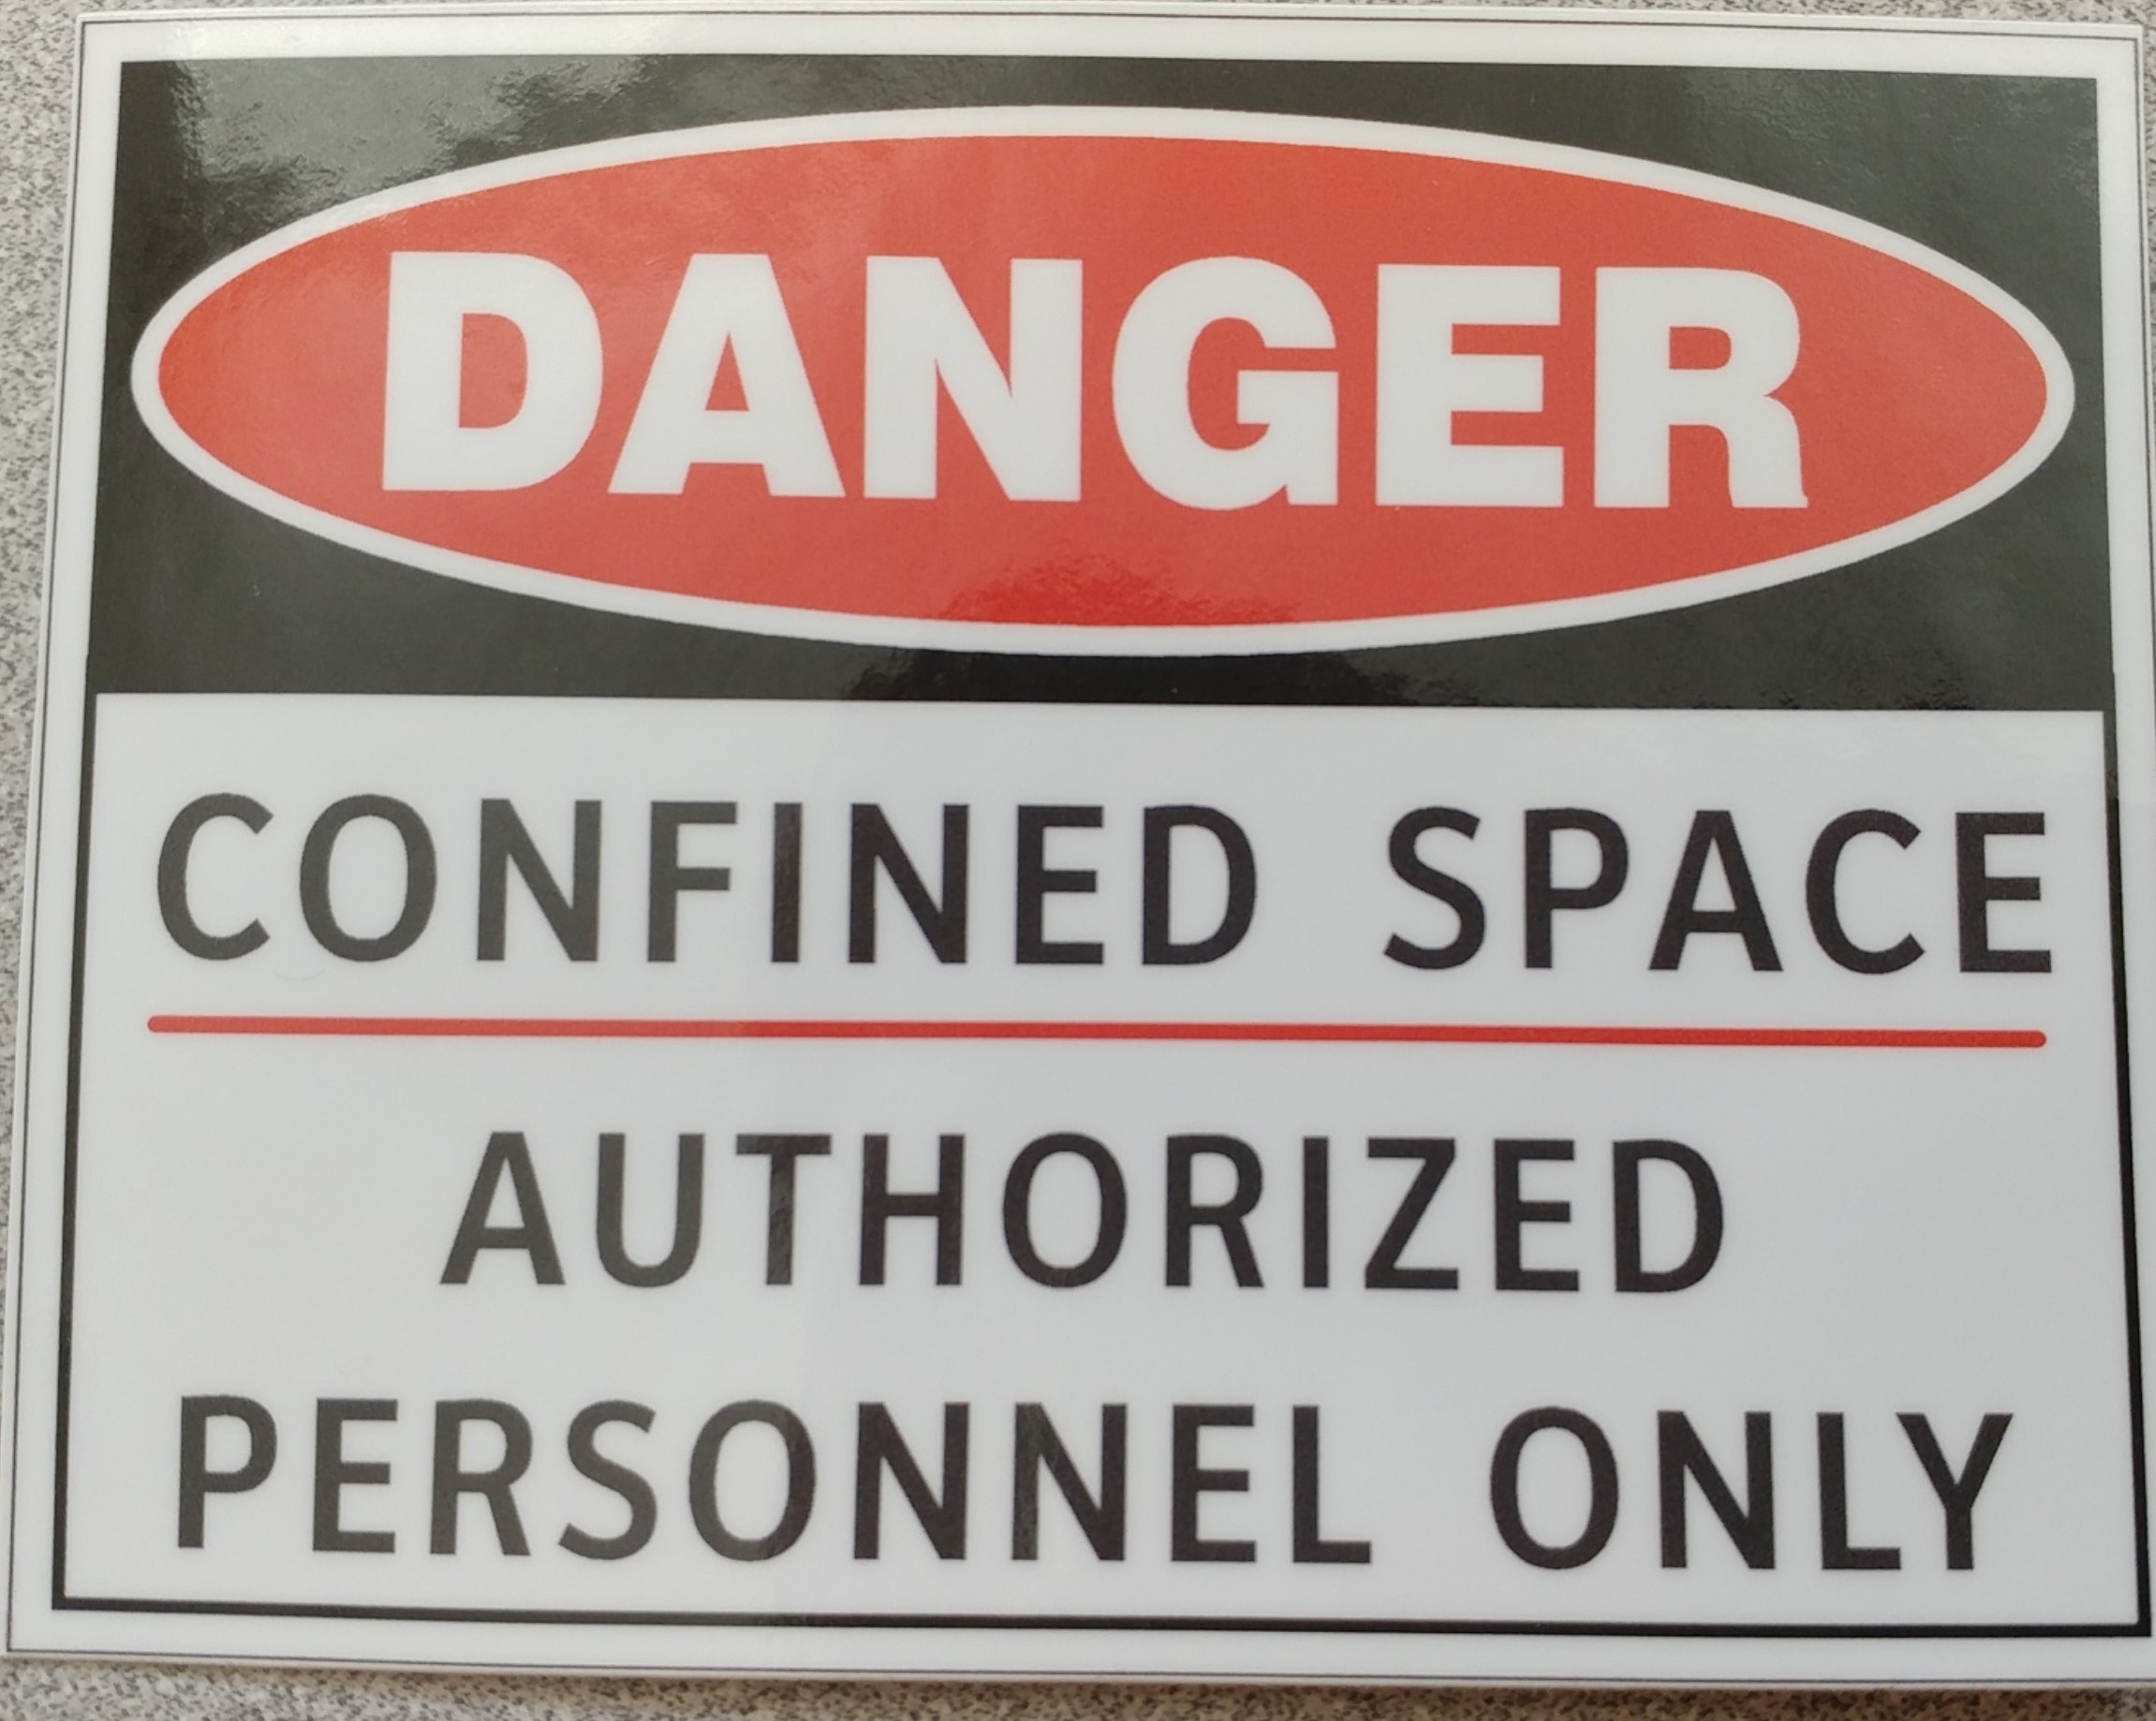 Danger, Confined Space, Authorized Personnel Only sign